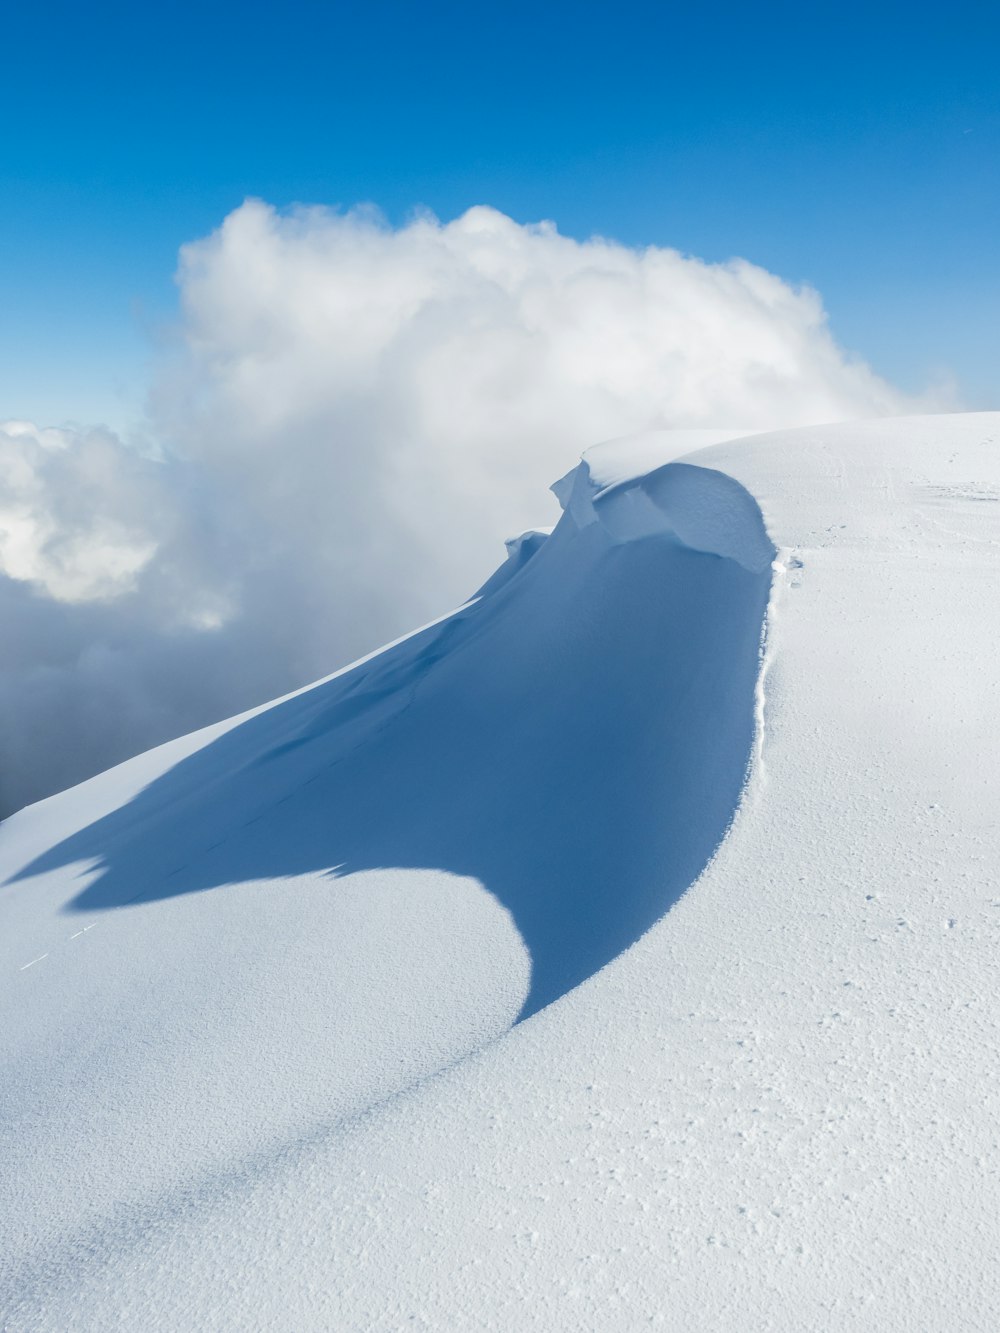 a person on skis is standing on a snowy hill